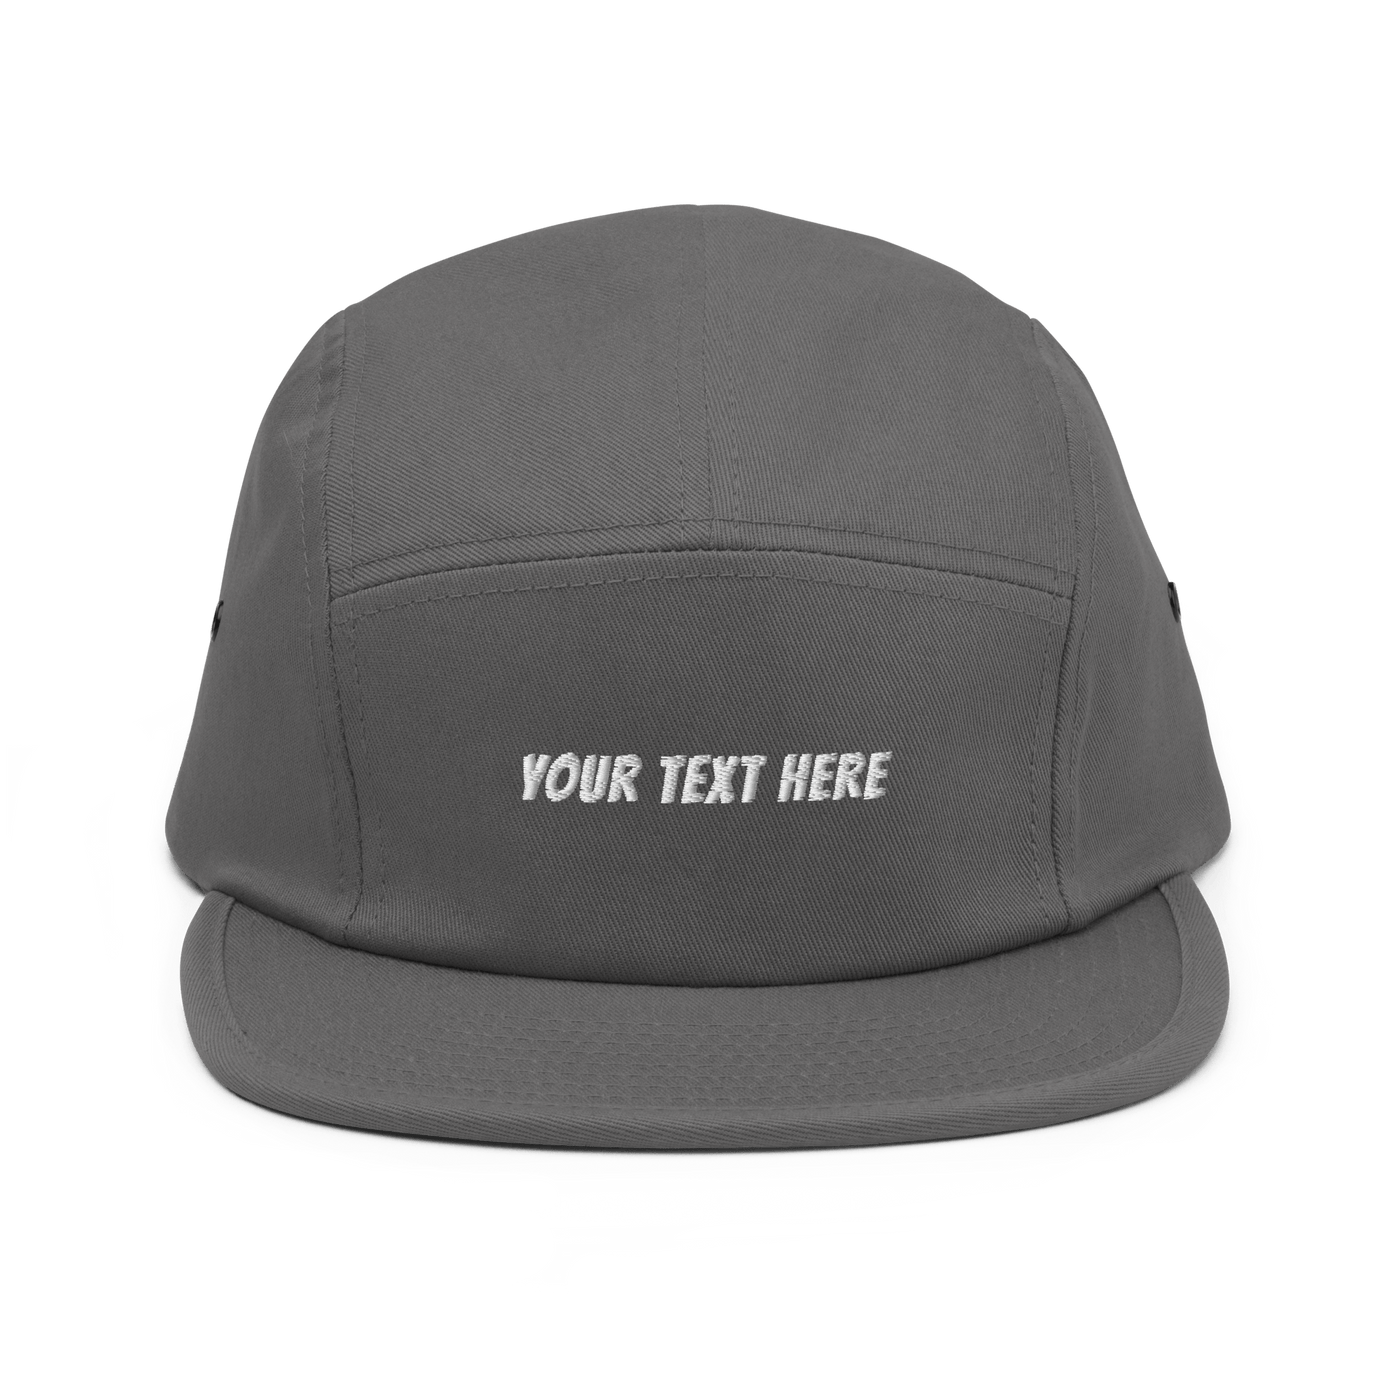 Customize Your Own Five Panel Cap - Grey - - Just Another Cap Store